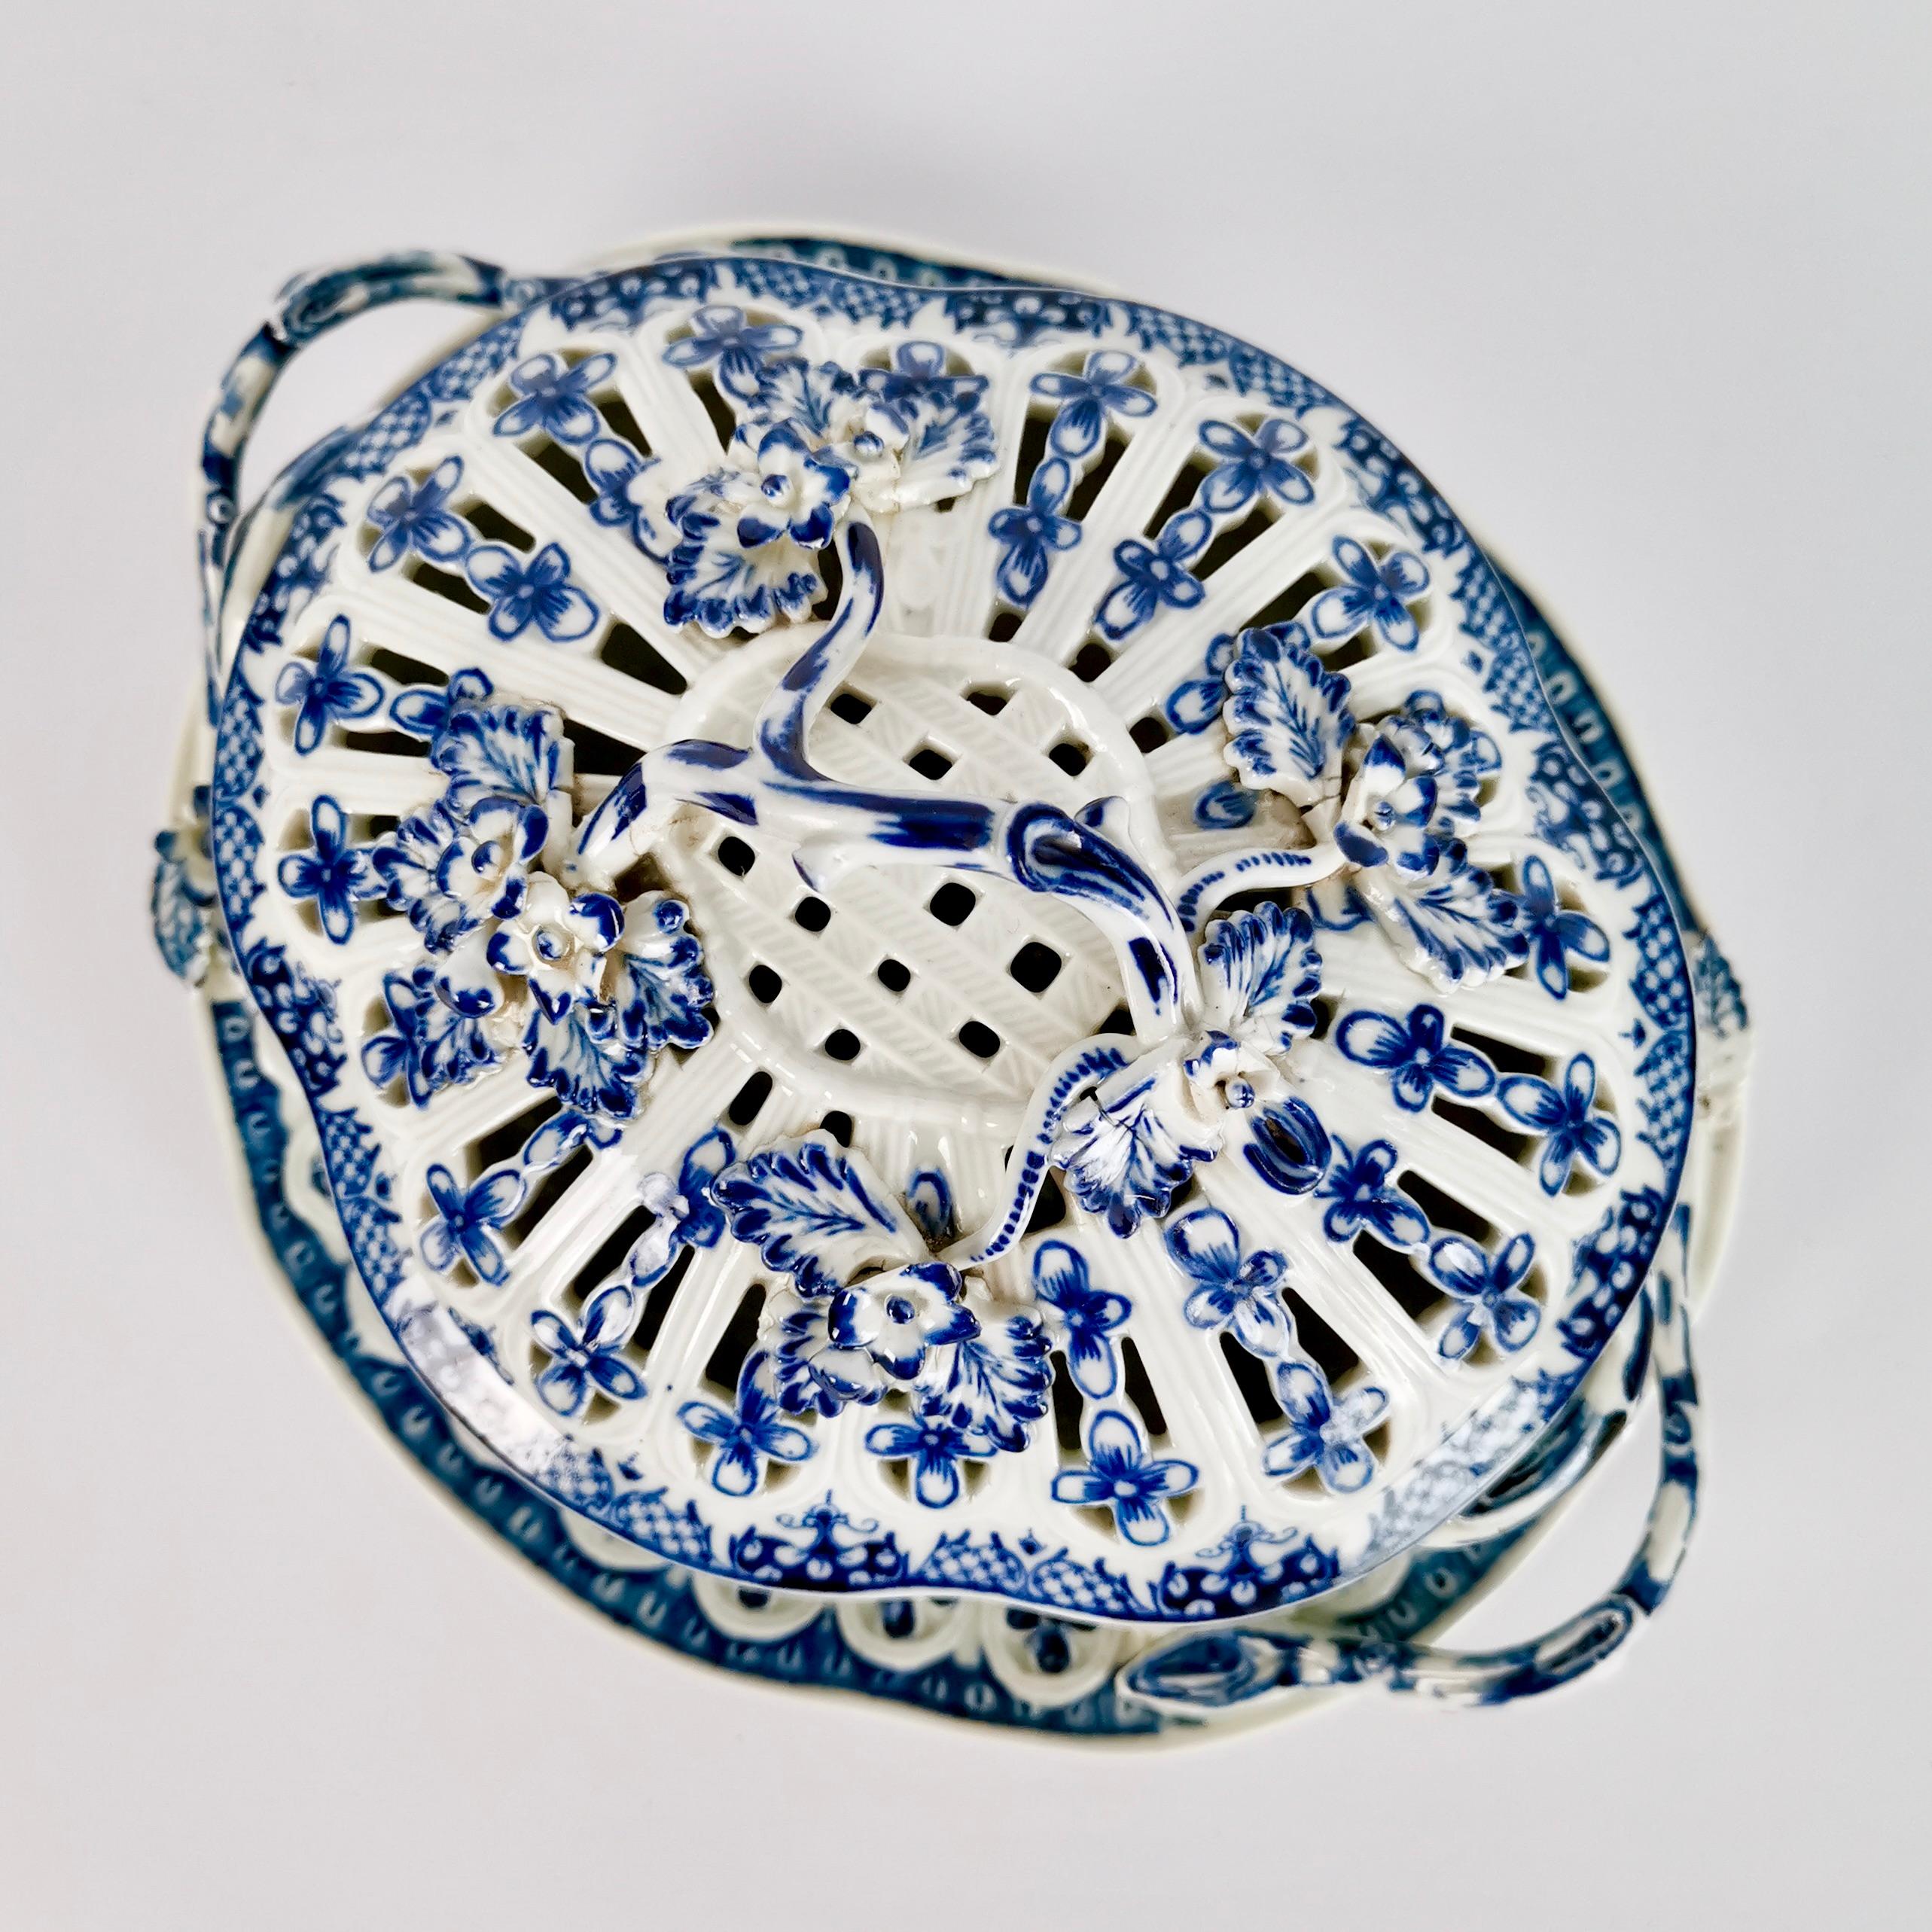 Hand-Painted Worcester Chestnut Basket, Blue on White Pine Cone, 18th Century, circa 1770